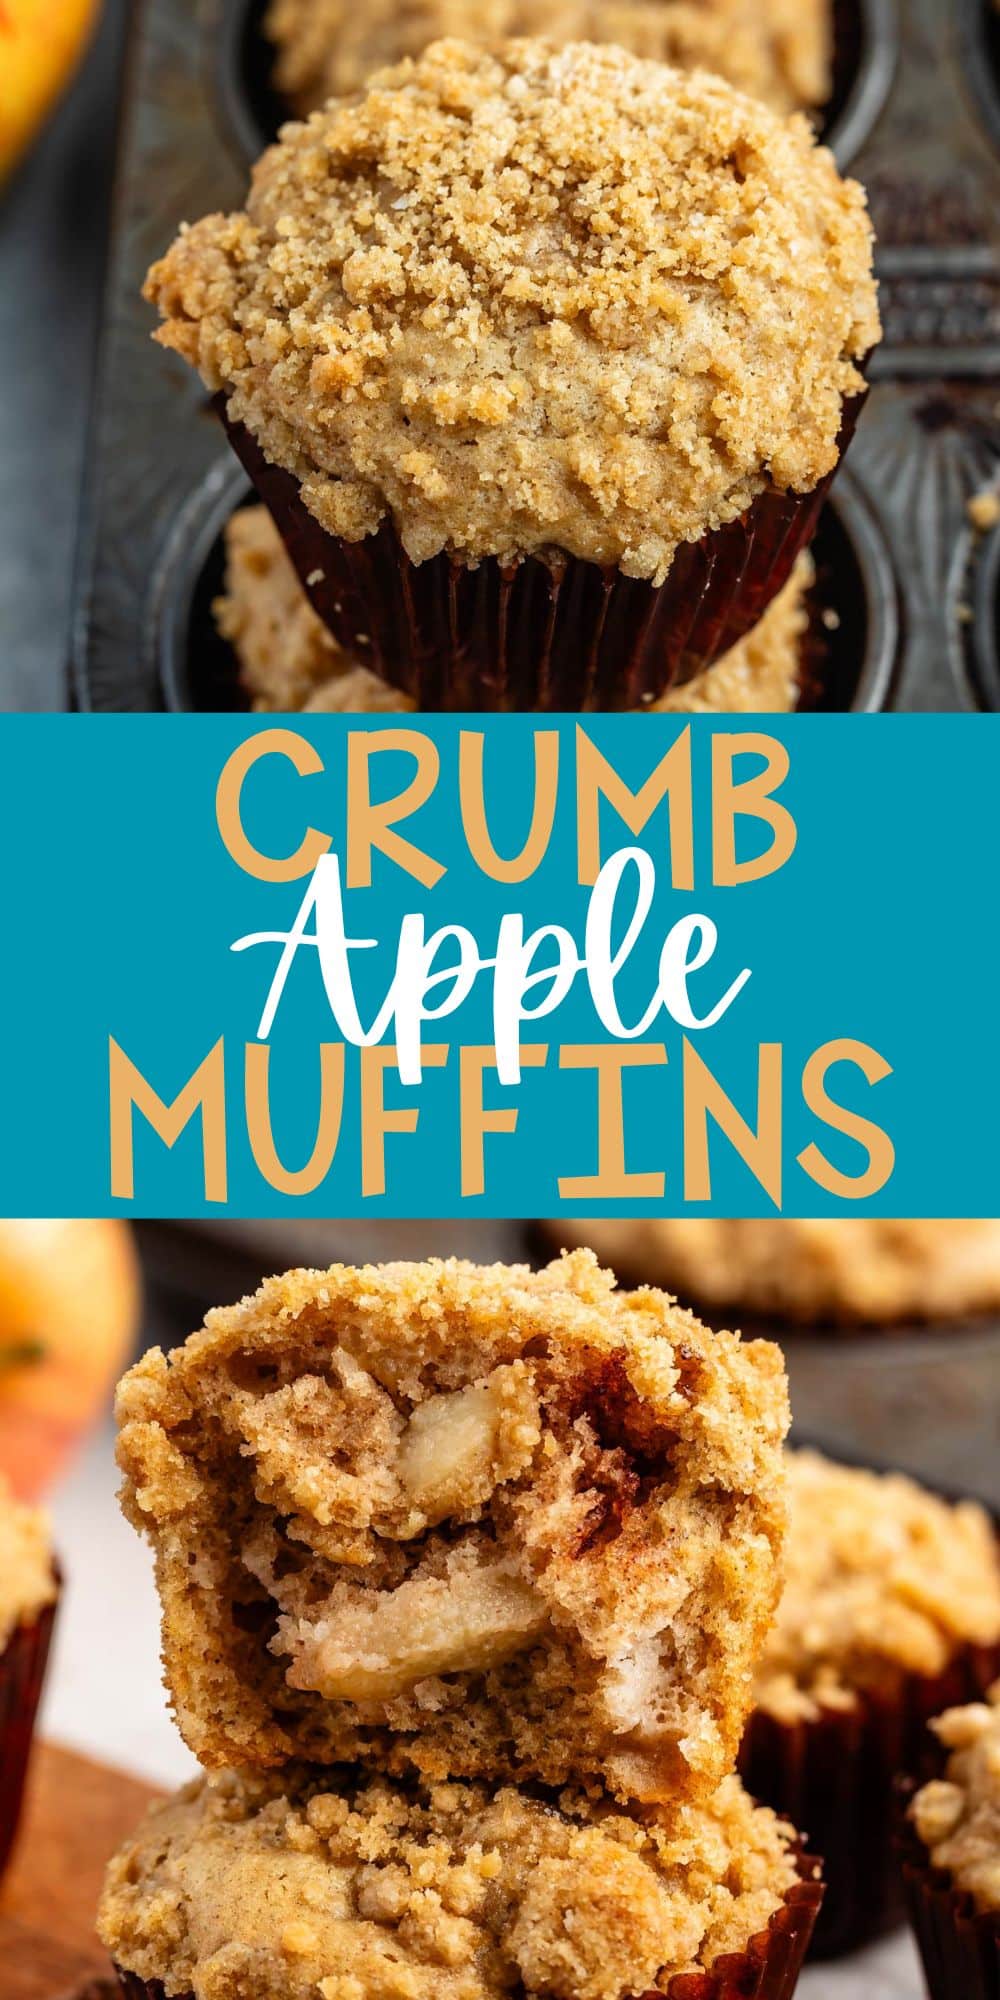 two photos of apple muffins in a brown cupcake tin with a crumble topping with words on the image.